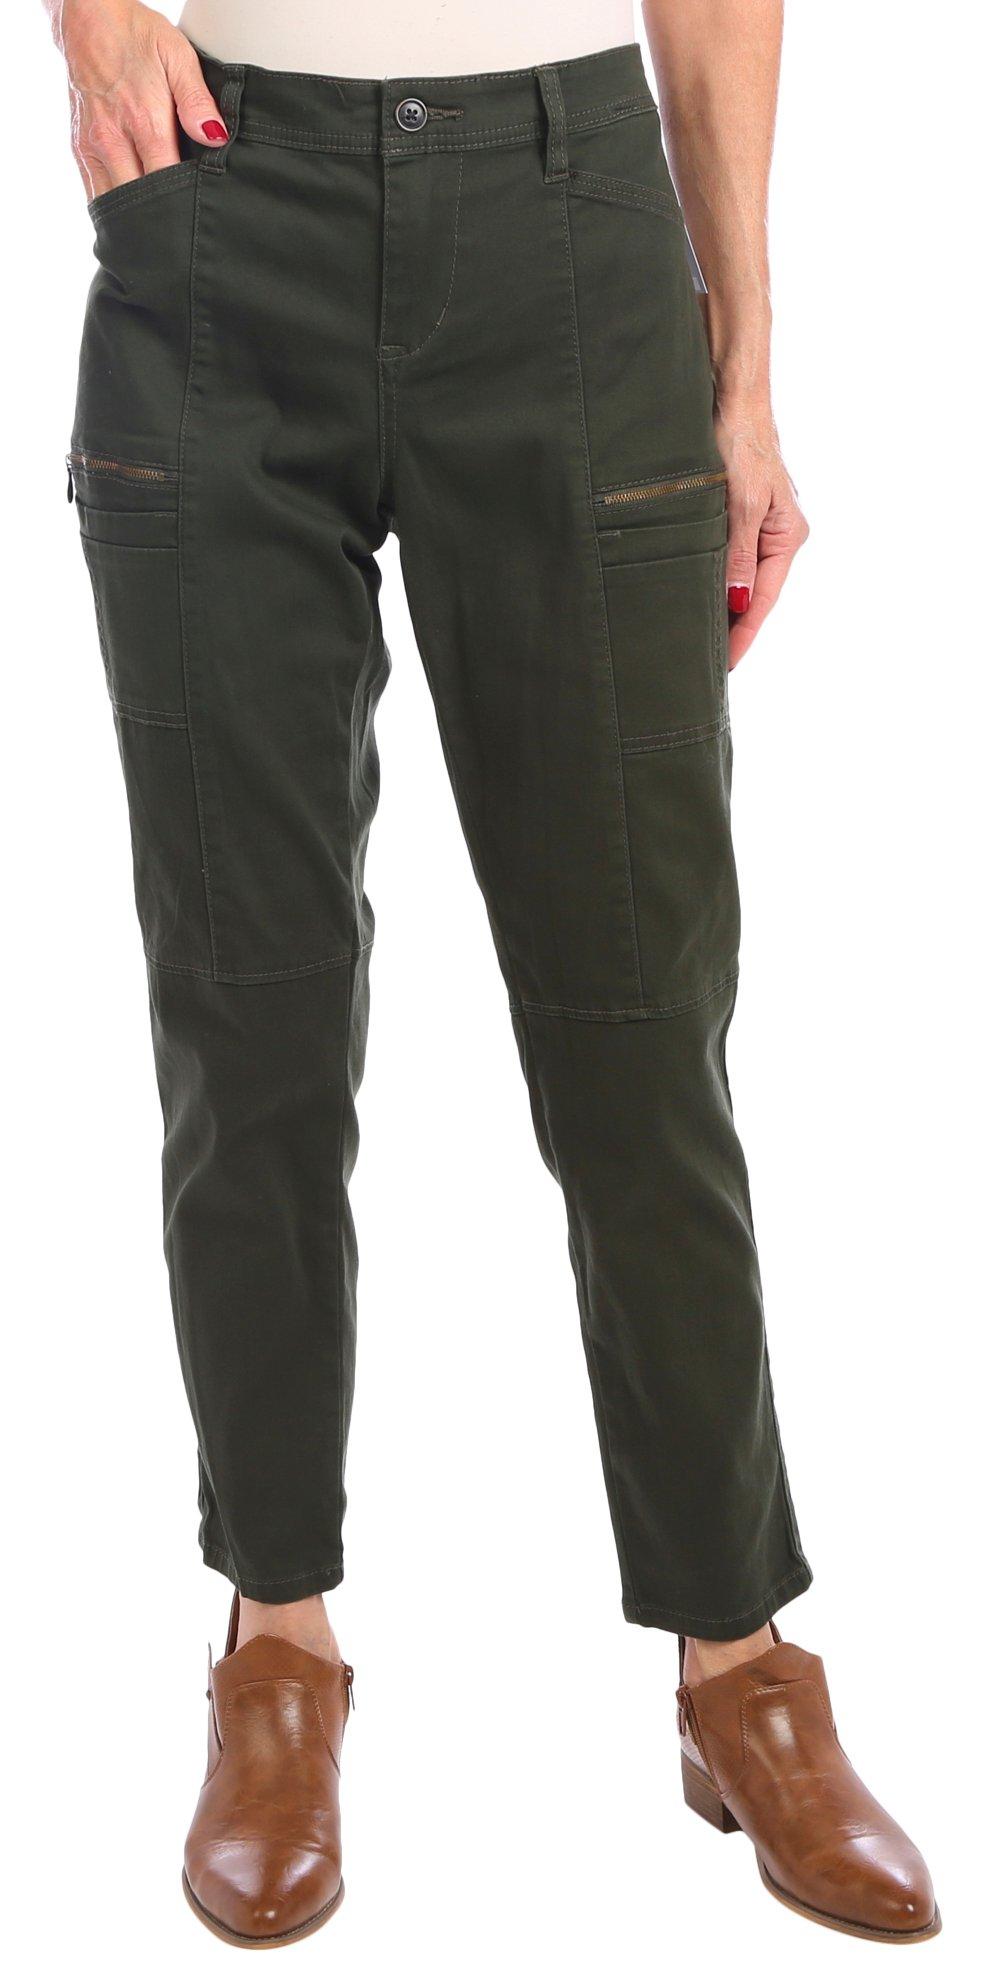 Womens Solid Cargo Pocket Pants